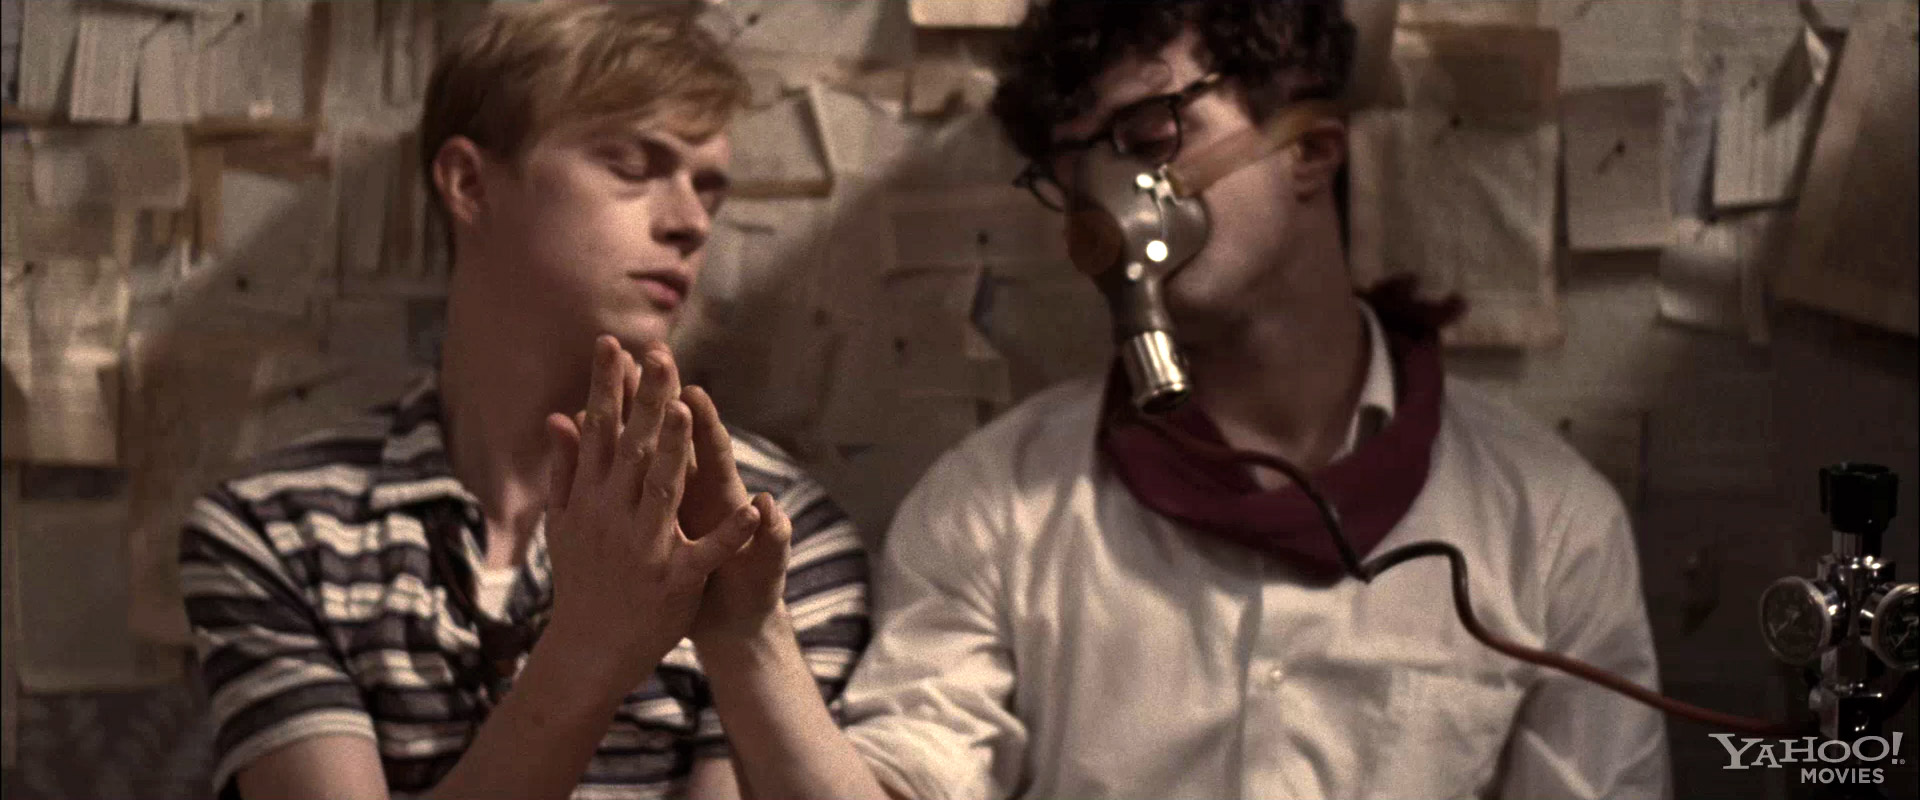 for KILL YOUR DARLINGS with Daniel Radcliffe